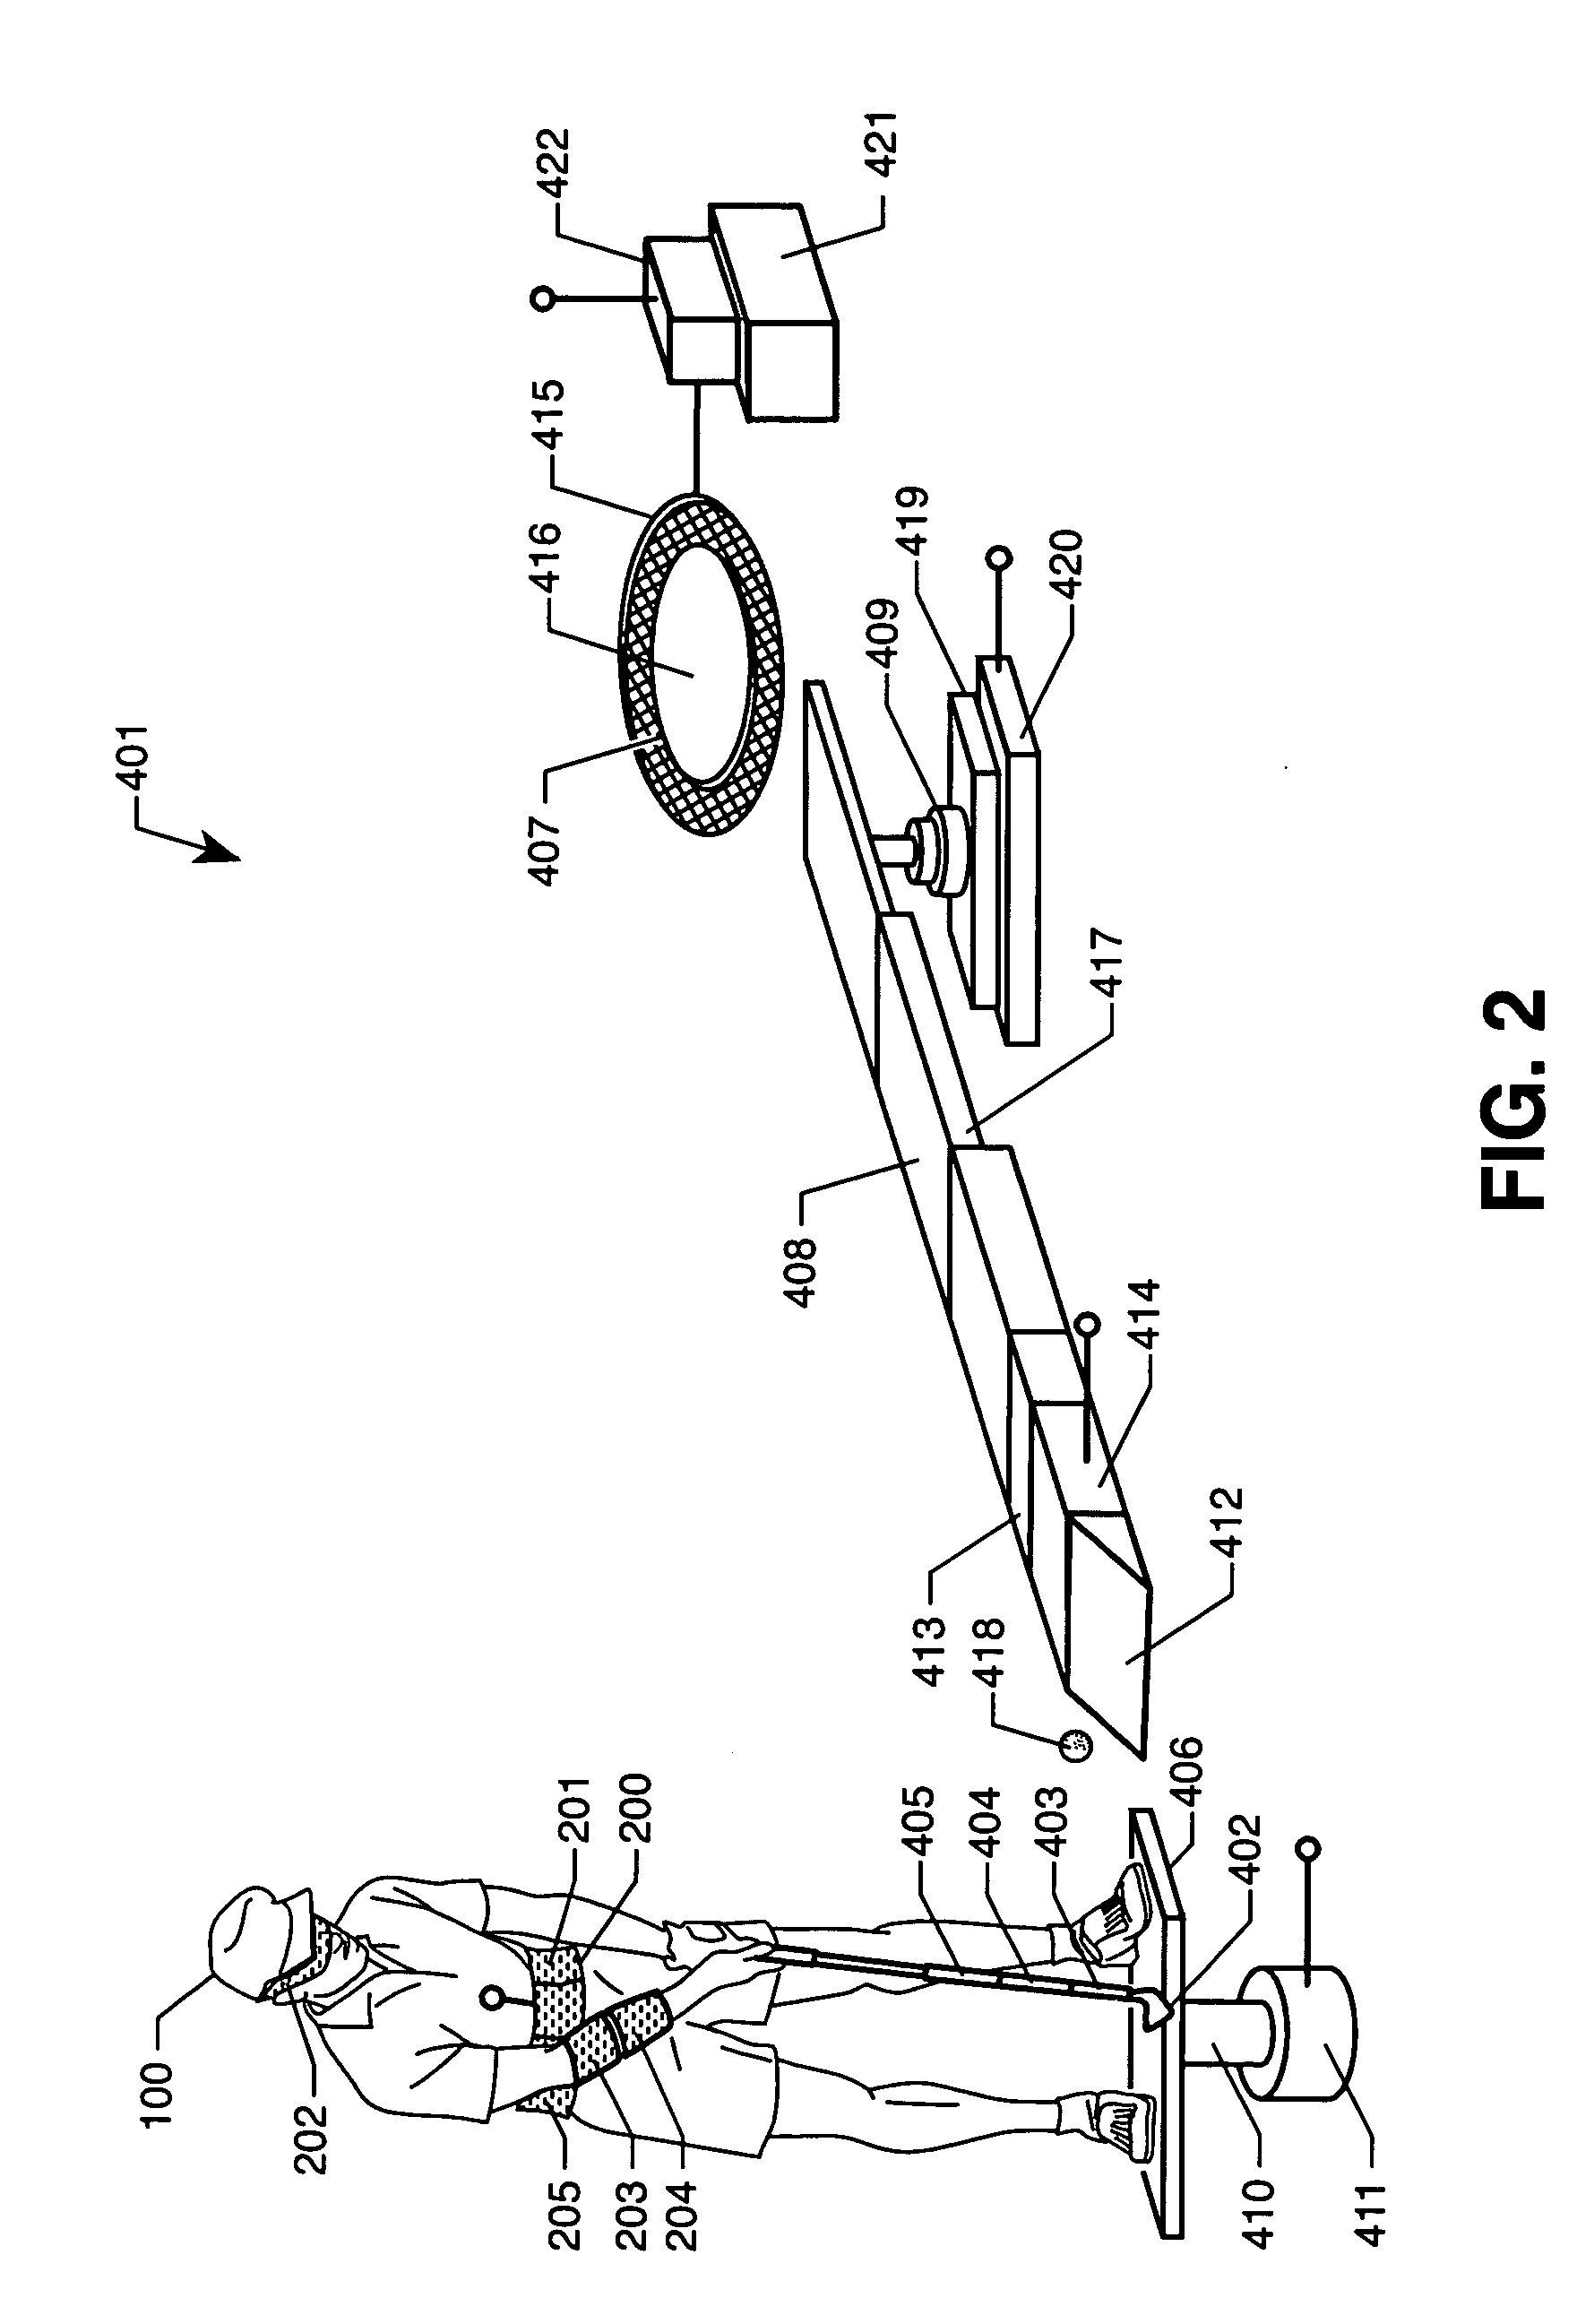 Method and apparatus for performance optimization through physical perturbation of task elements